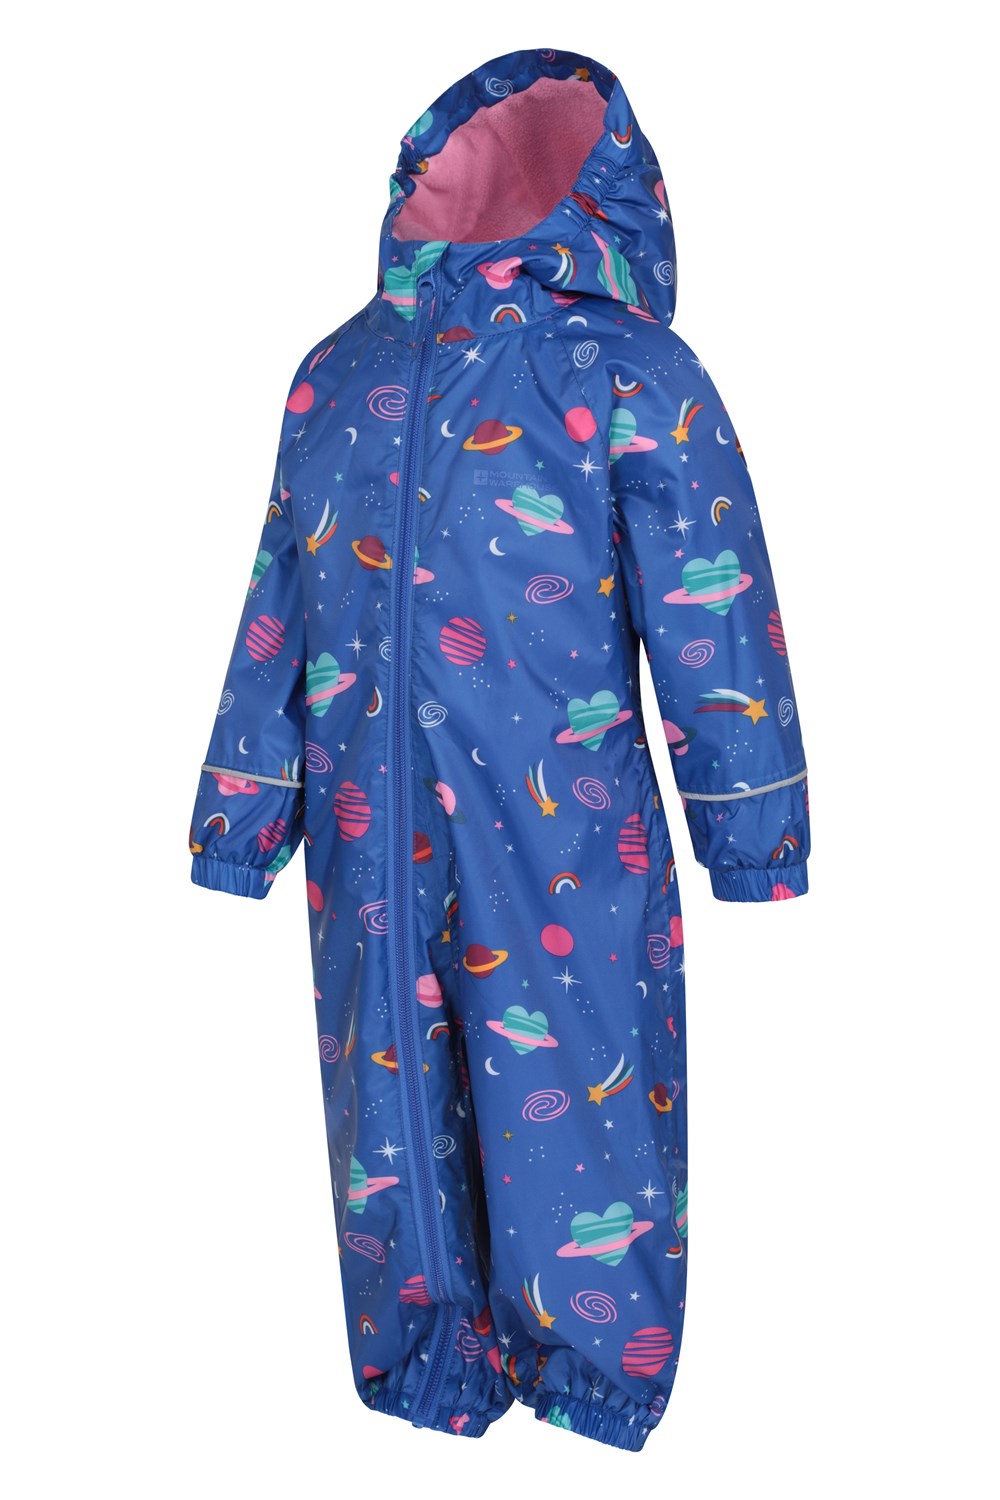 Kids Waterproof Softshell Fleece Lined Puddle All In One Rain Suit Overall